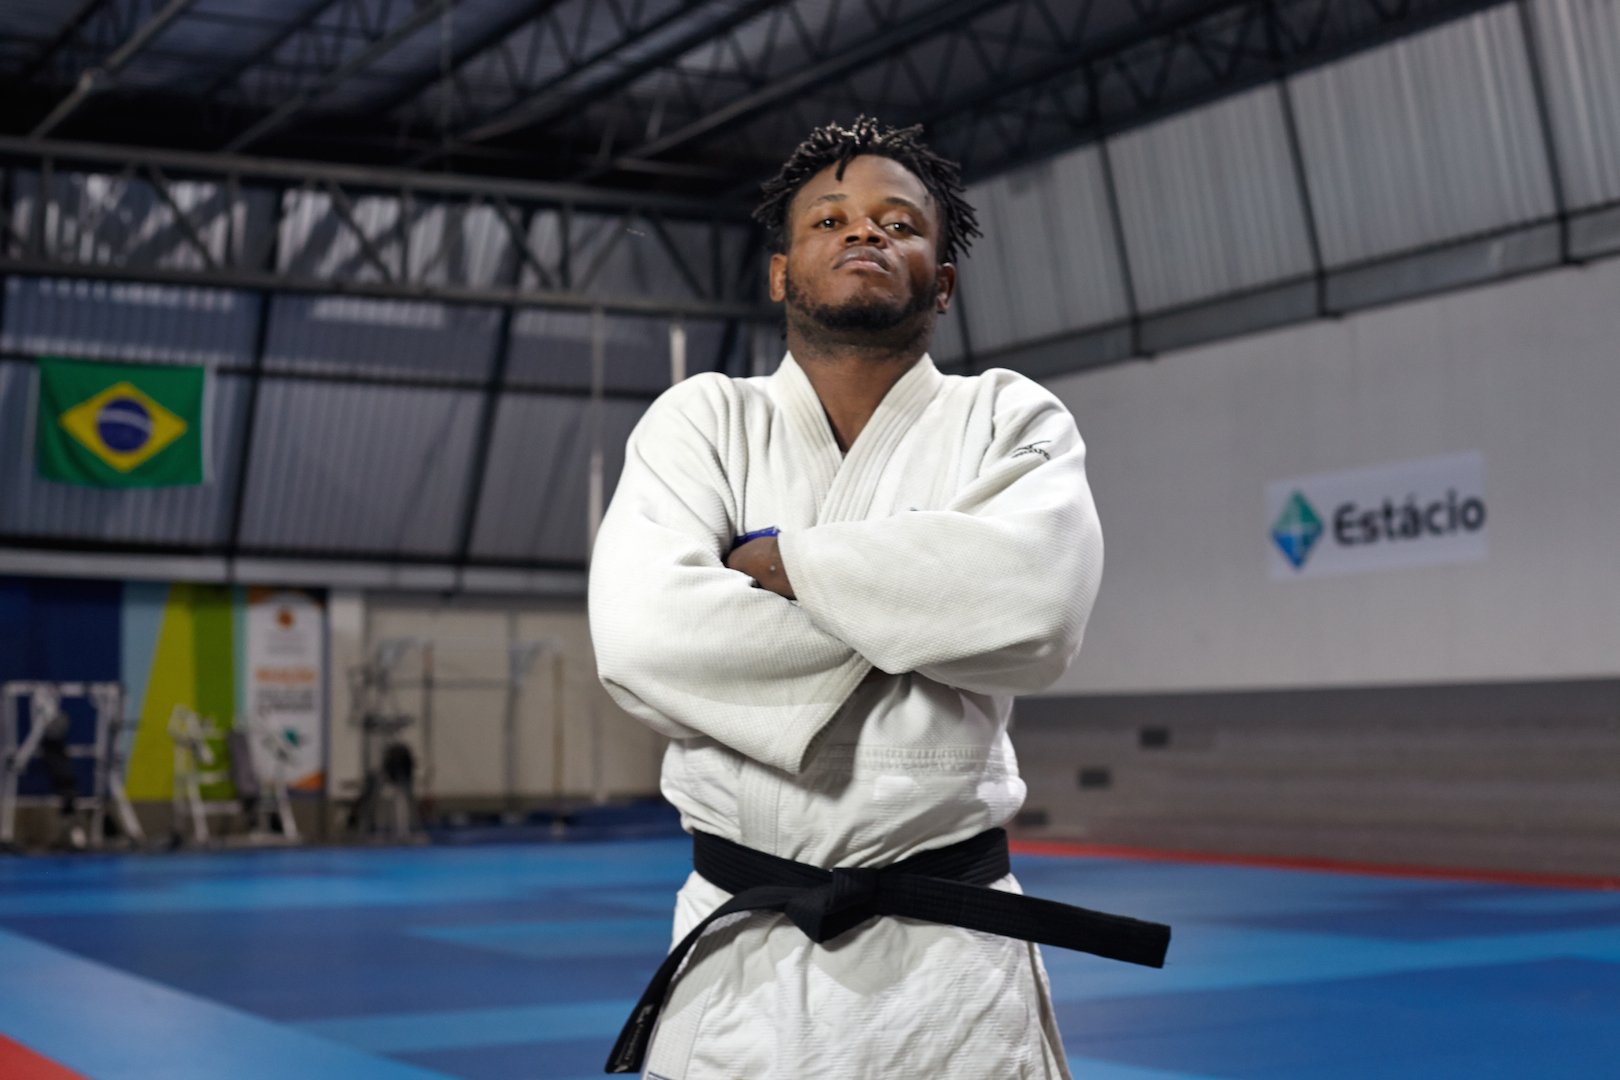 Judo athlete Popole Misenga after training in Rio de Janeiro. Misenga, a refugee from DR Congo living in Brazil, is trying to qualify for the Olympic Games Rio 2016 for a newly created Olympic Team of Refugees. The Refugee Olympic Team (ROT) will compete under the Olympic flag and have the Olympic anthem as its national anthem.